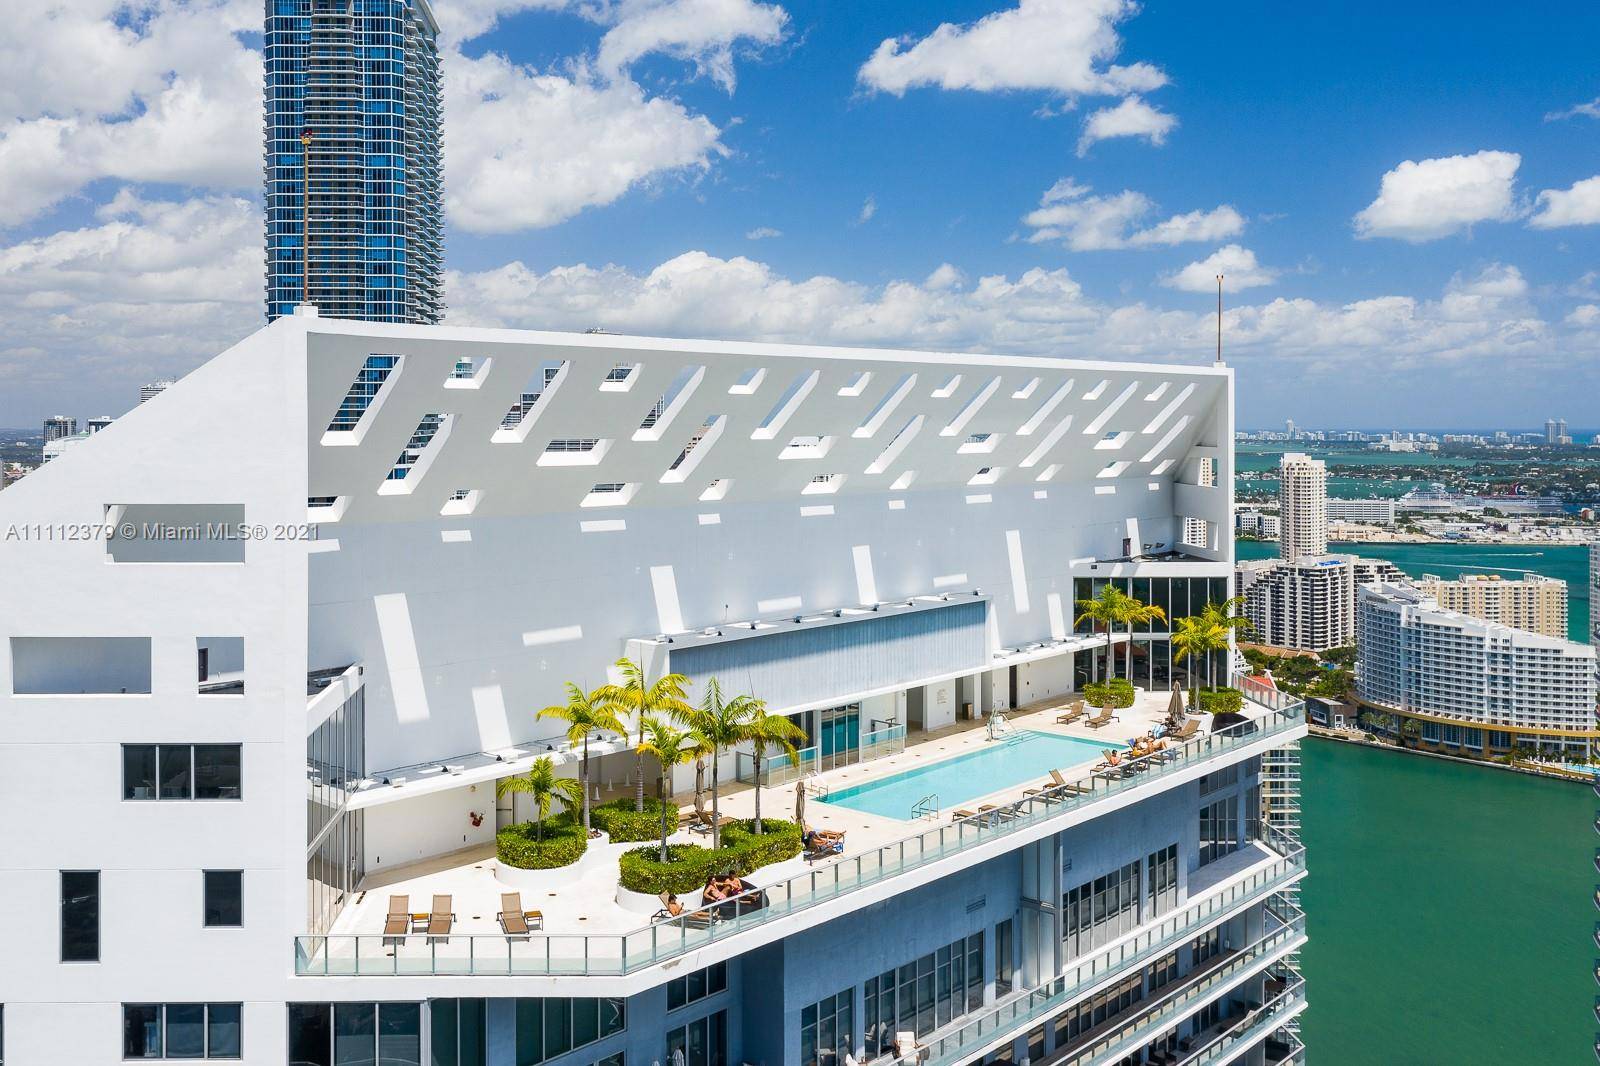 The privilege of ownership in one of the most beautiful cities of the world, Miami located in the Brickell Financial District.